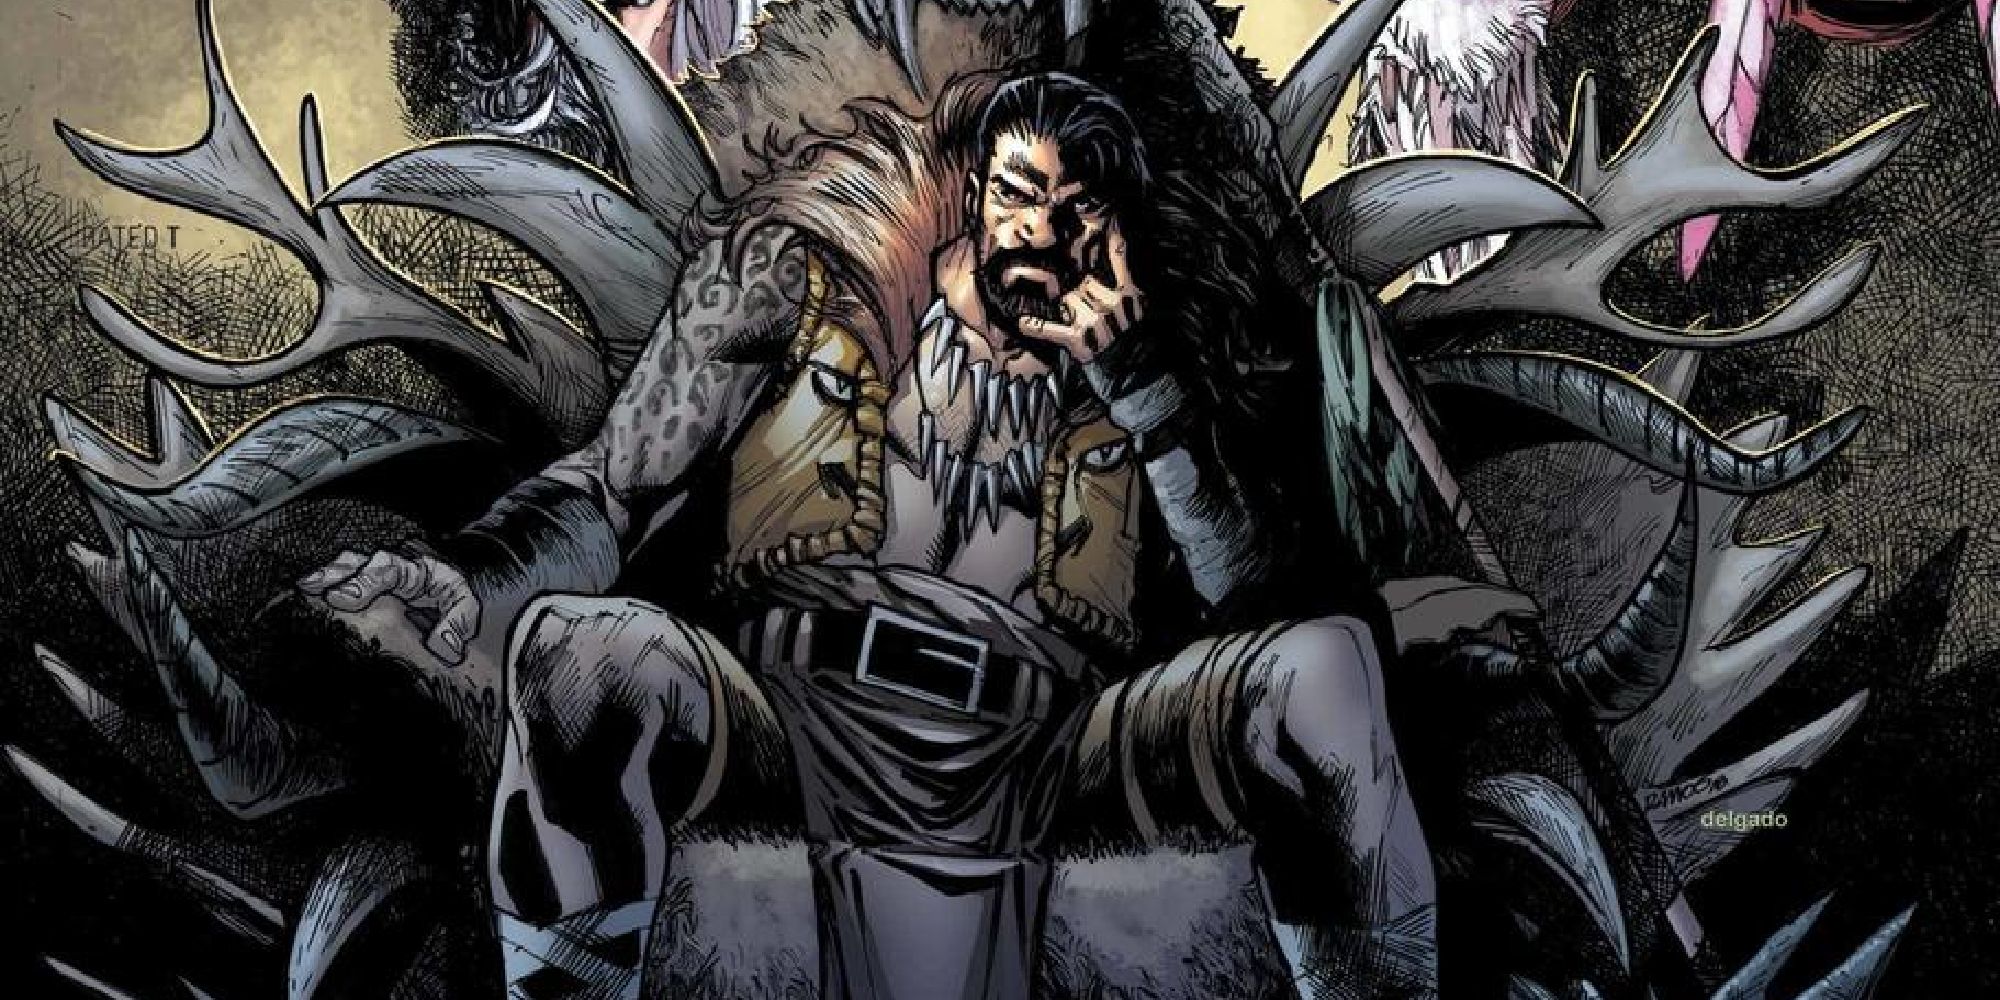 Kraven the Hunter sitting on his throne in the comics